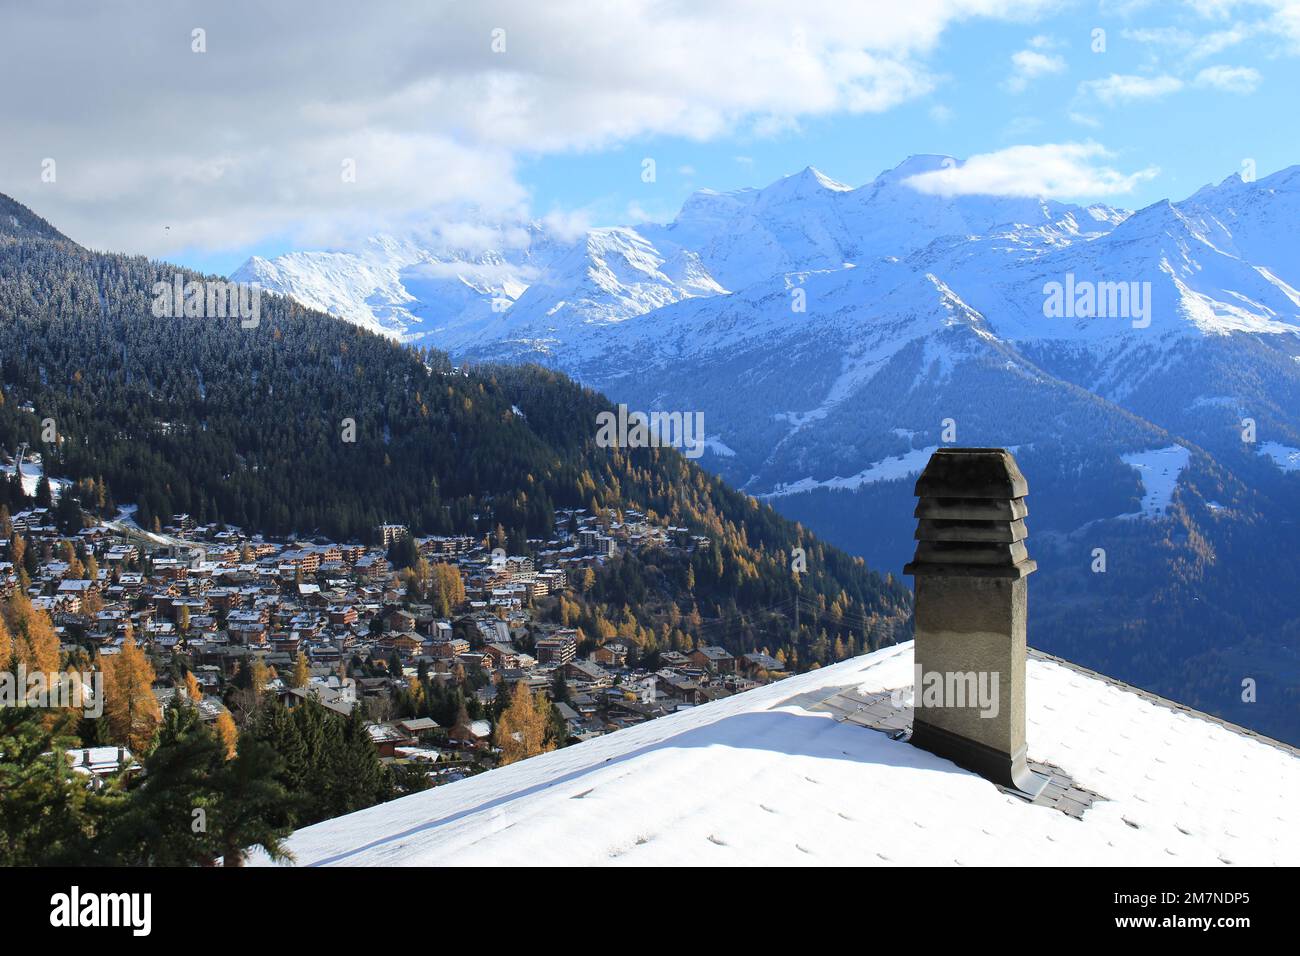 View of snow covered Swiss alps in autumn over the ski resort town of Verbier, Valais, Switzerland. Travel landscape of Swiss chalet overlooking alps Stock Photo